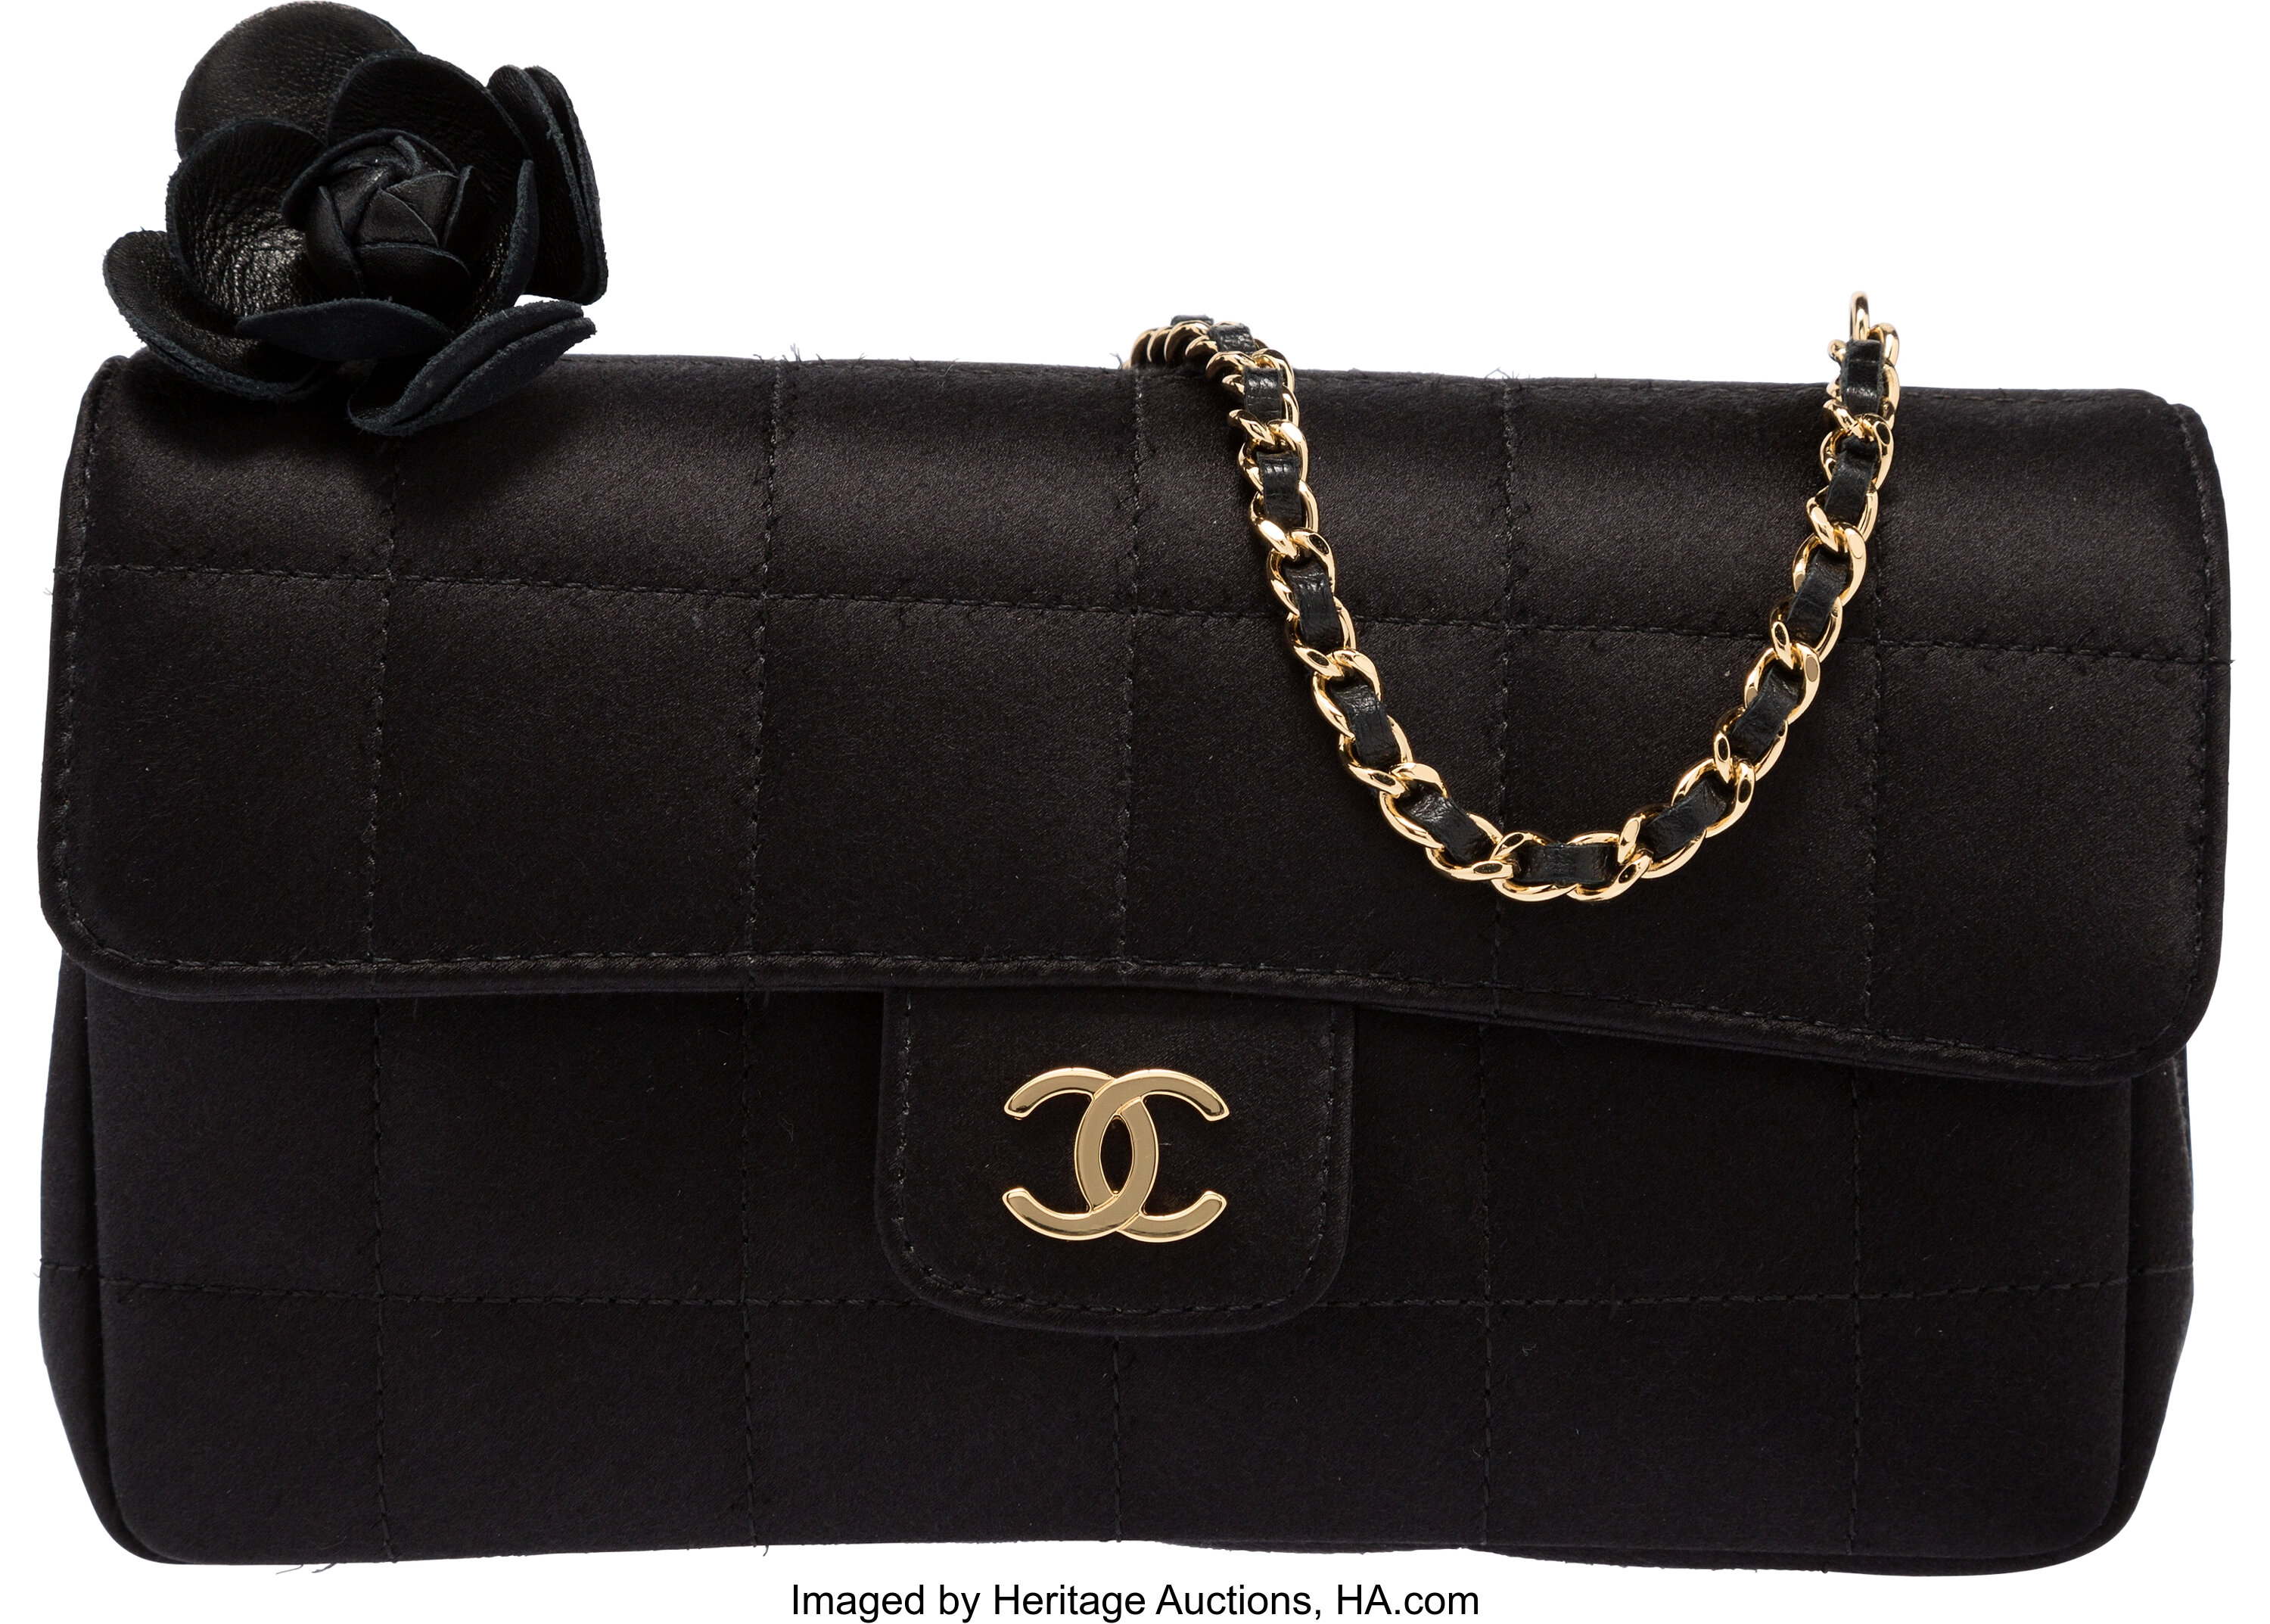 90's CHANEL Black Satin Evening Bag with Large Gold Sculpted Camellia  Flower Clasp & Chain Shoulder Strap!